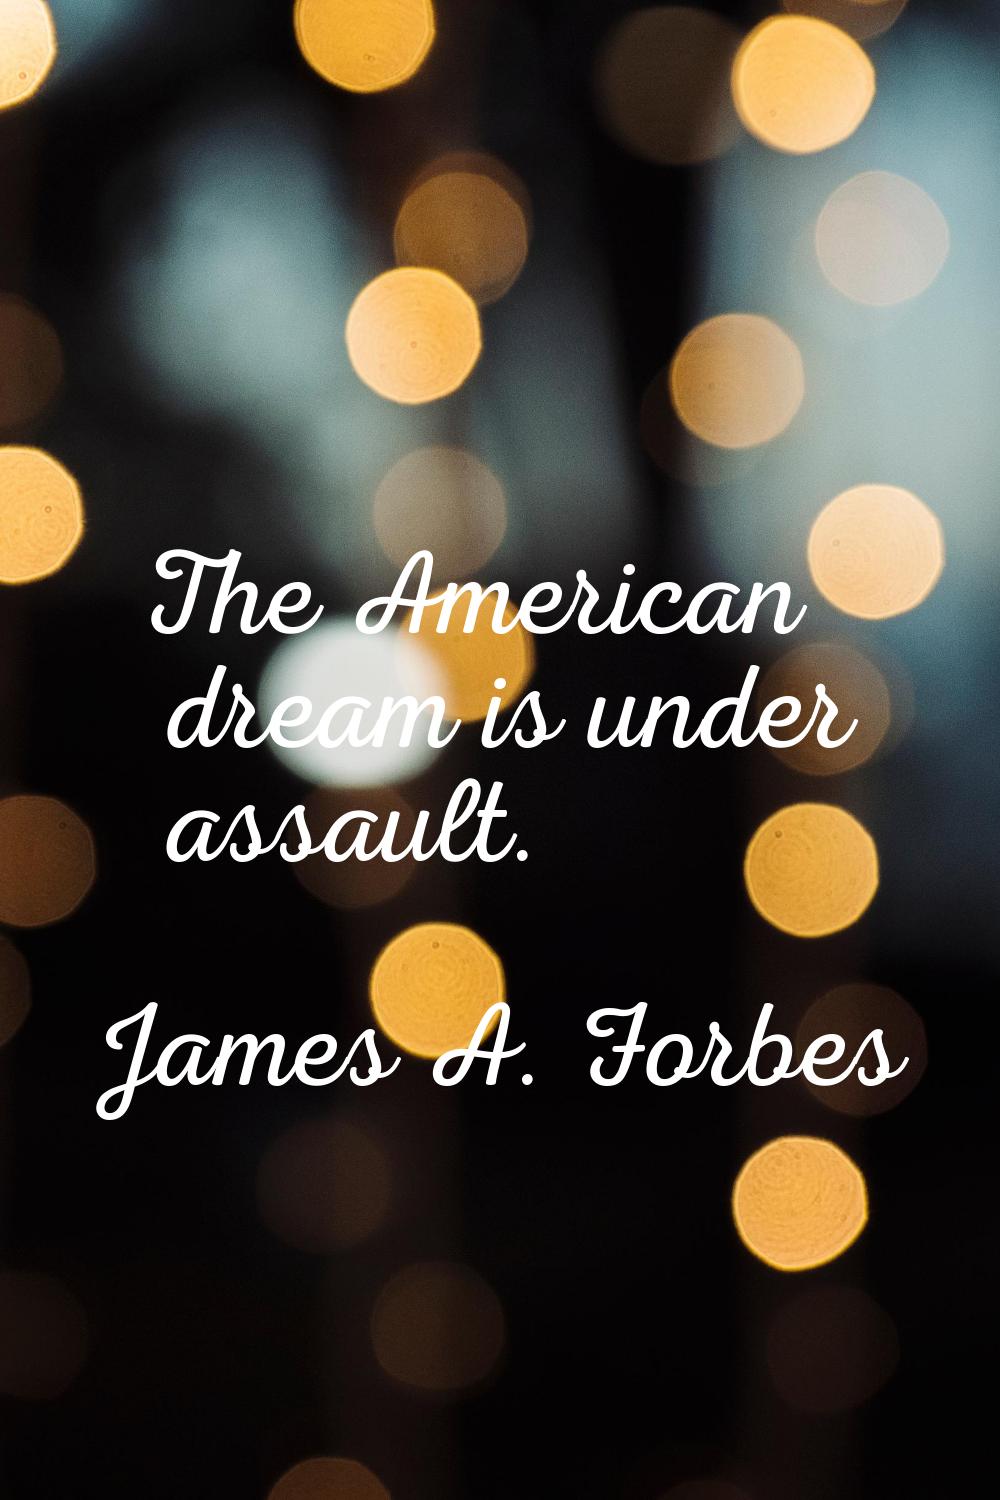 The American dream is under assault.